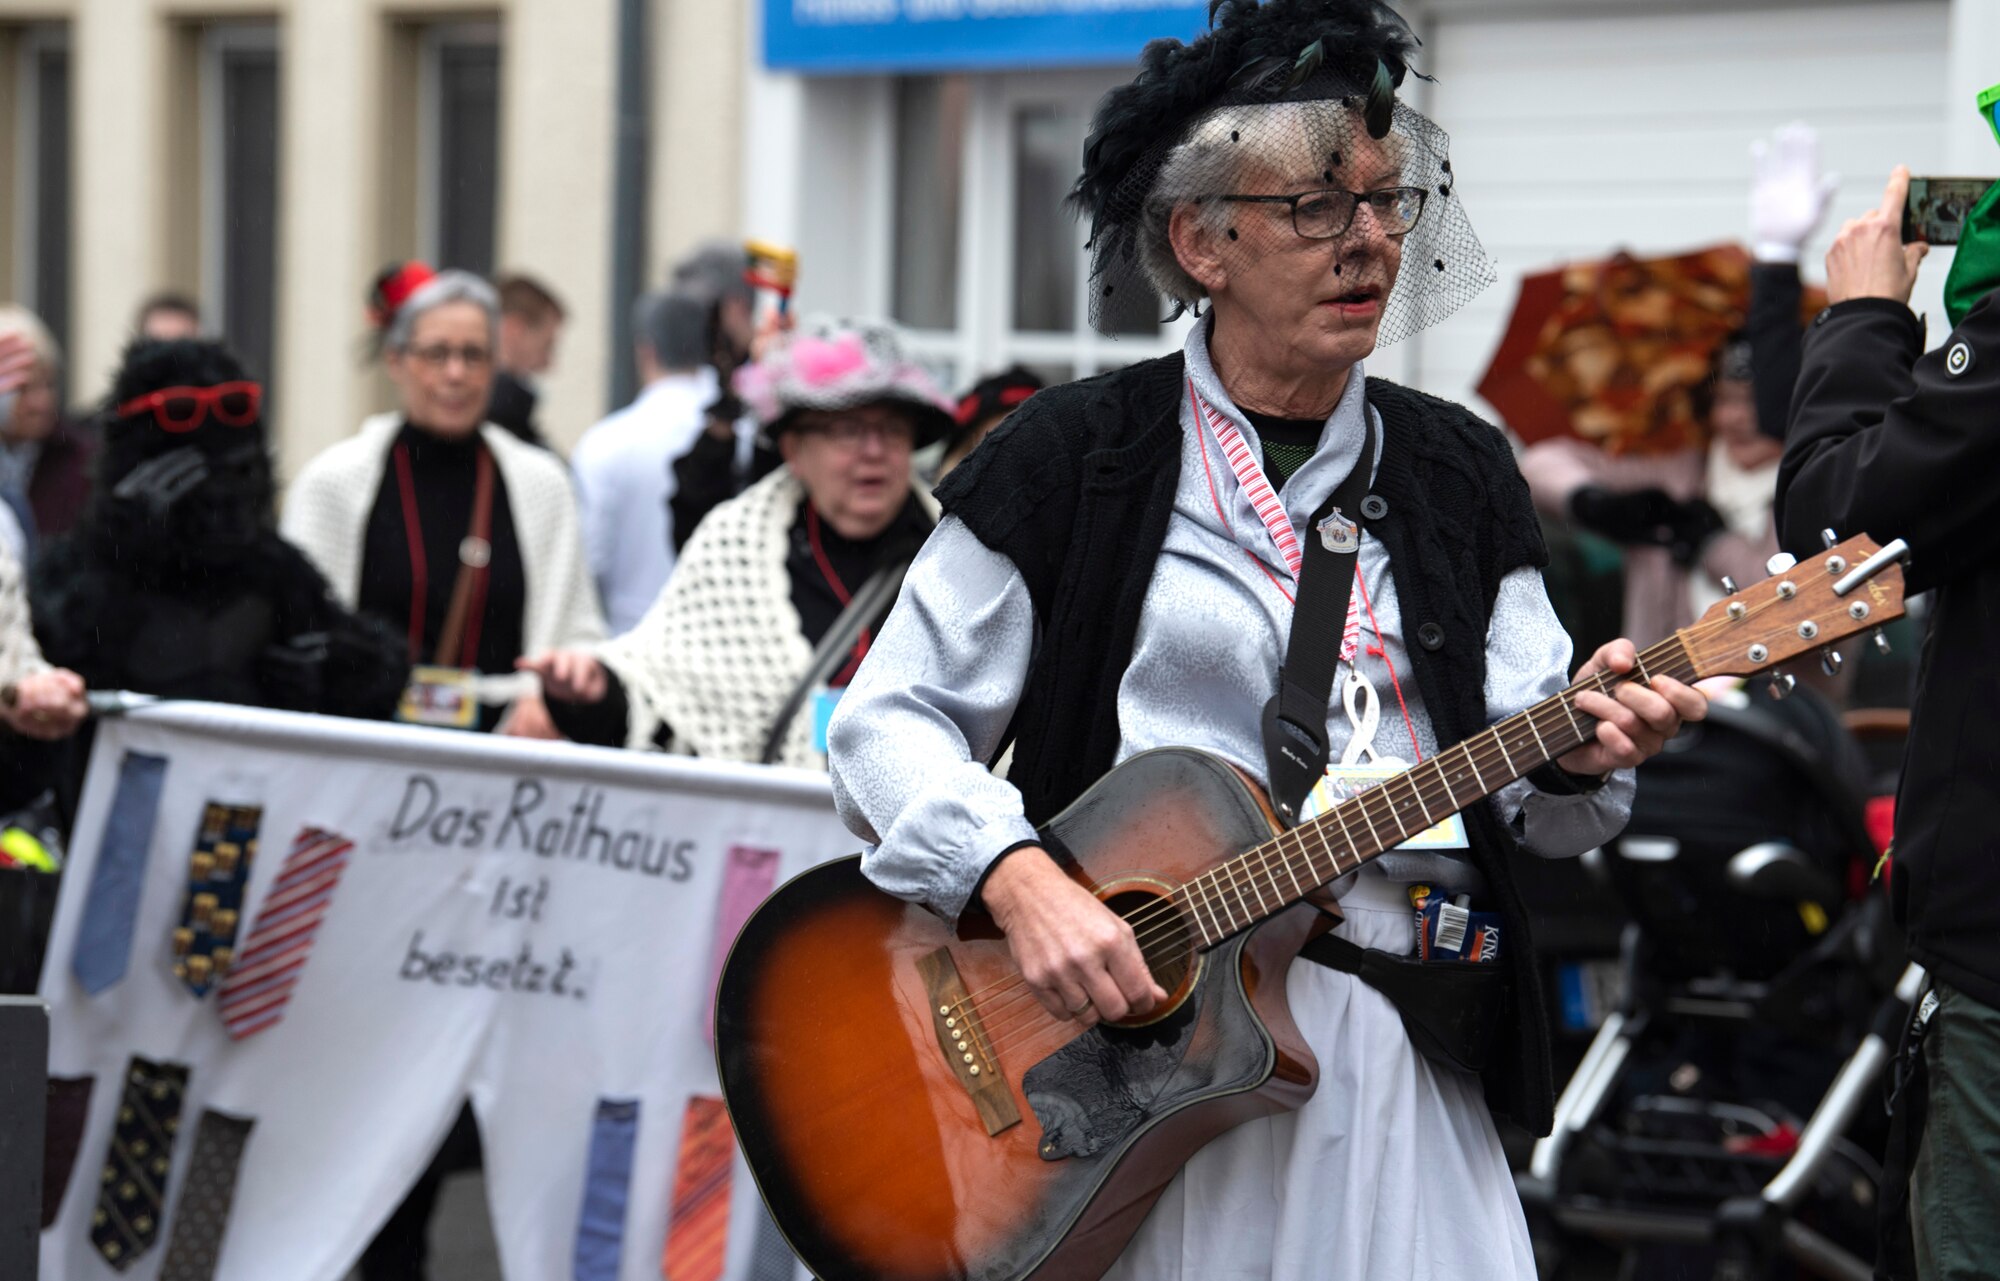 Bitburg residents celebrate Fasching with Saber Nation